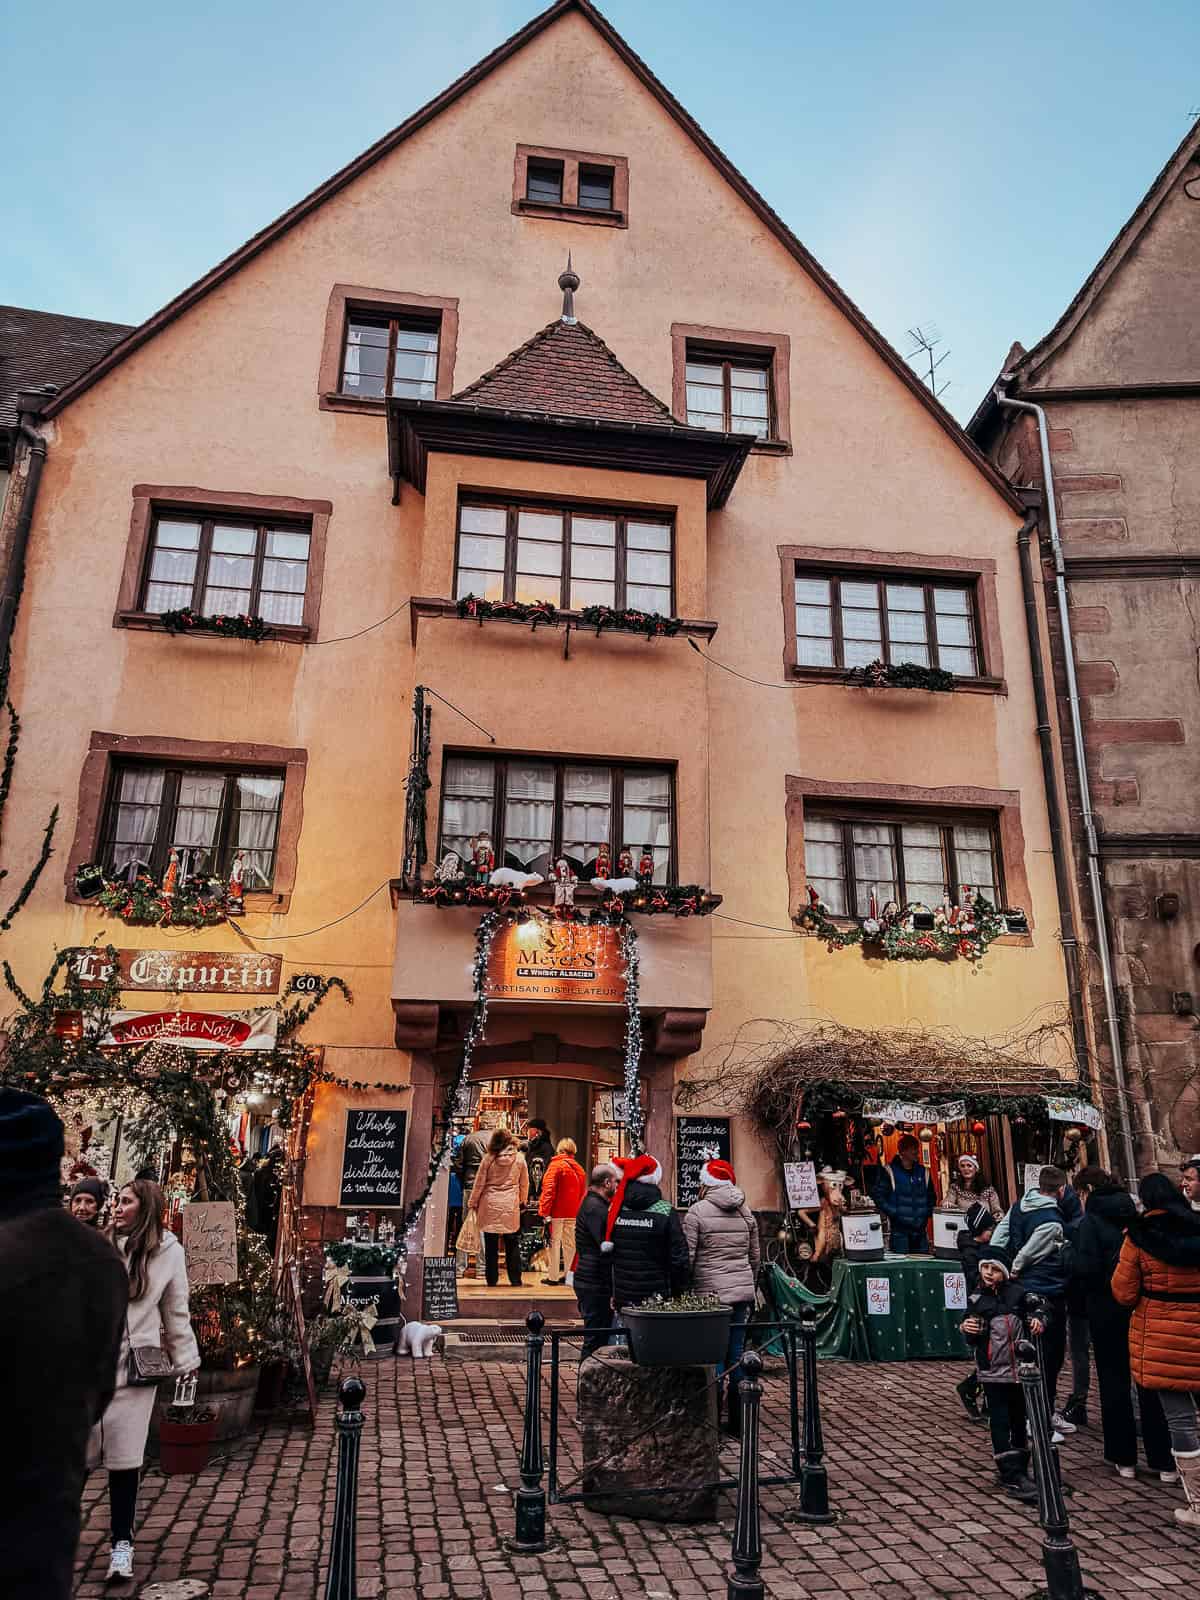 Visitors gather in front of a festive peach-colored building in Kaysersberg, with the shop 'Meyer's Artisan de la Feutrine' decked out in Christmas decorations and a sign that reads 'Marché de Noël'.